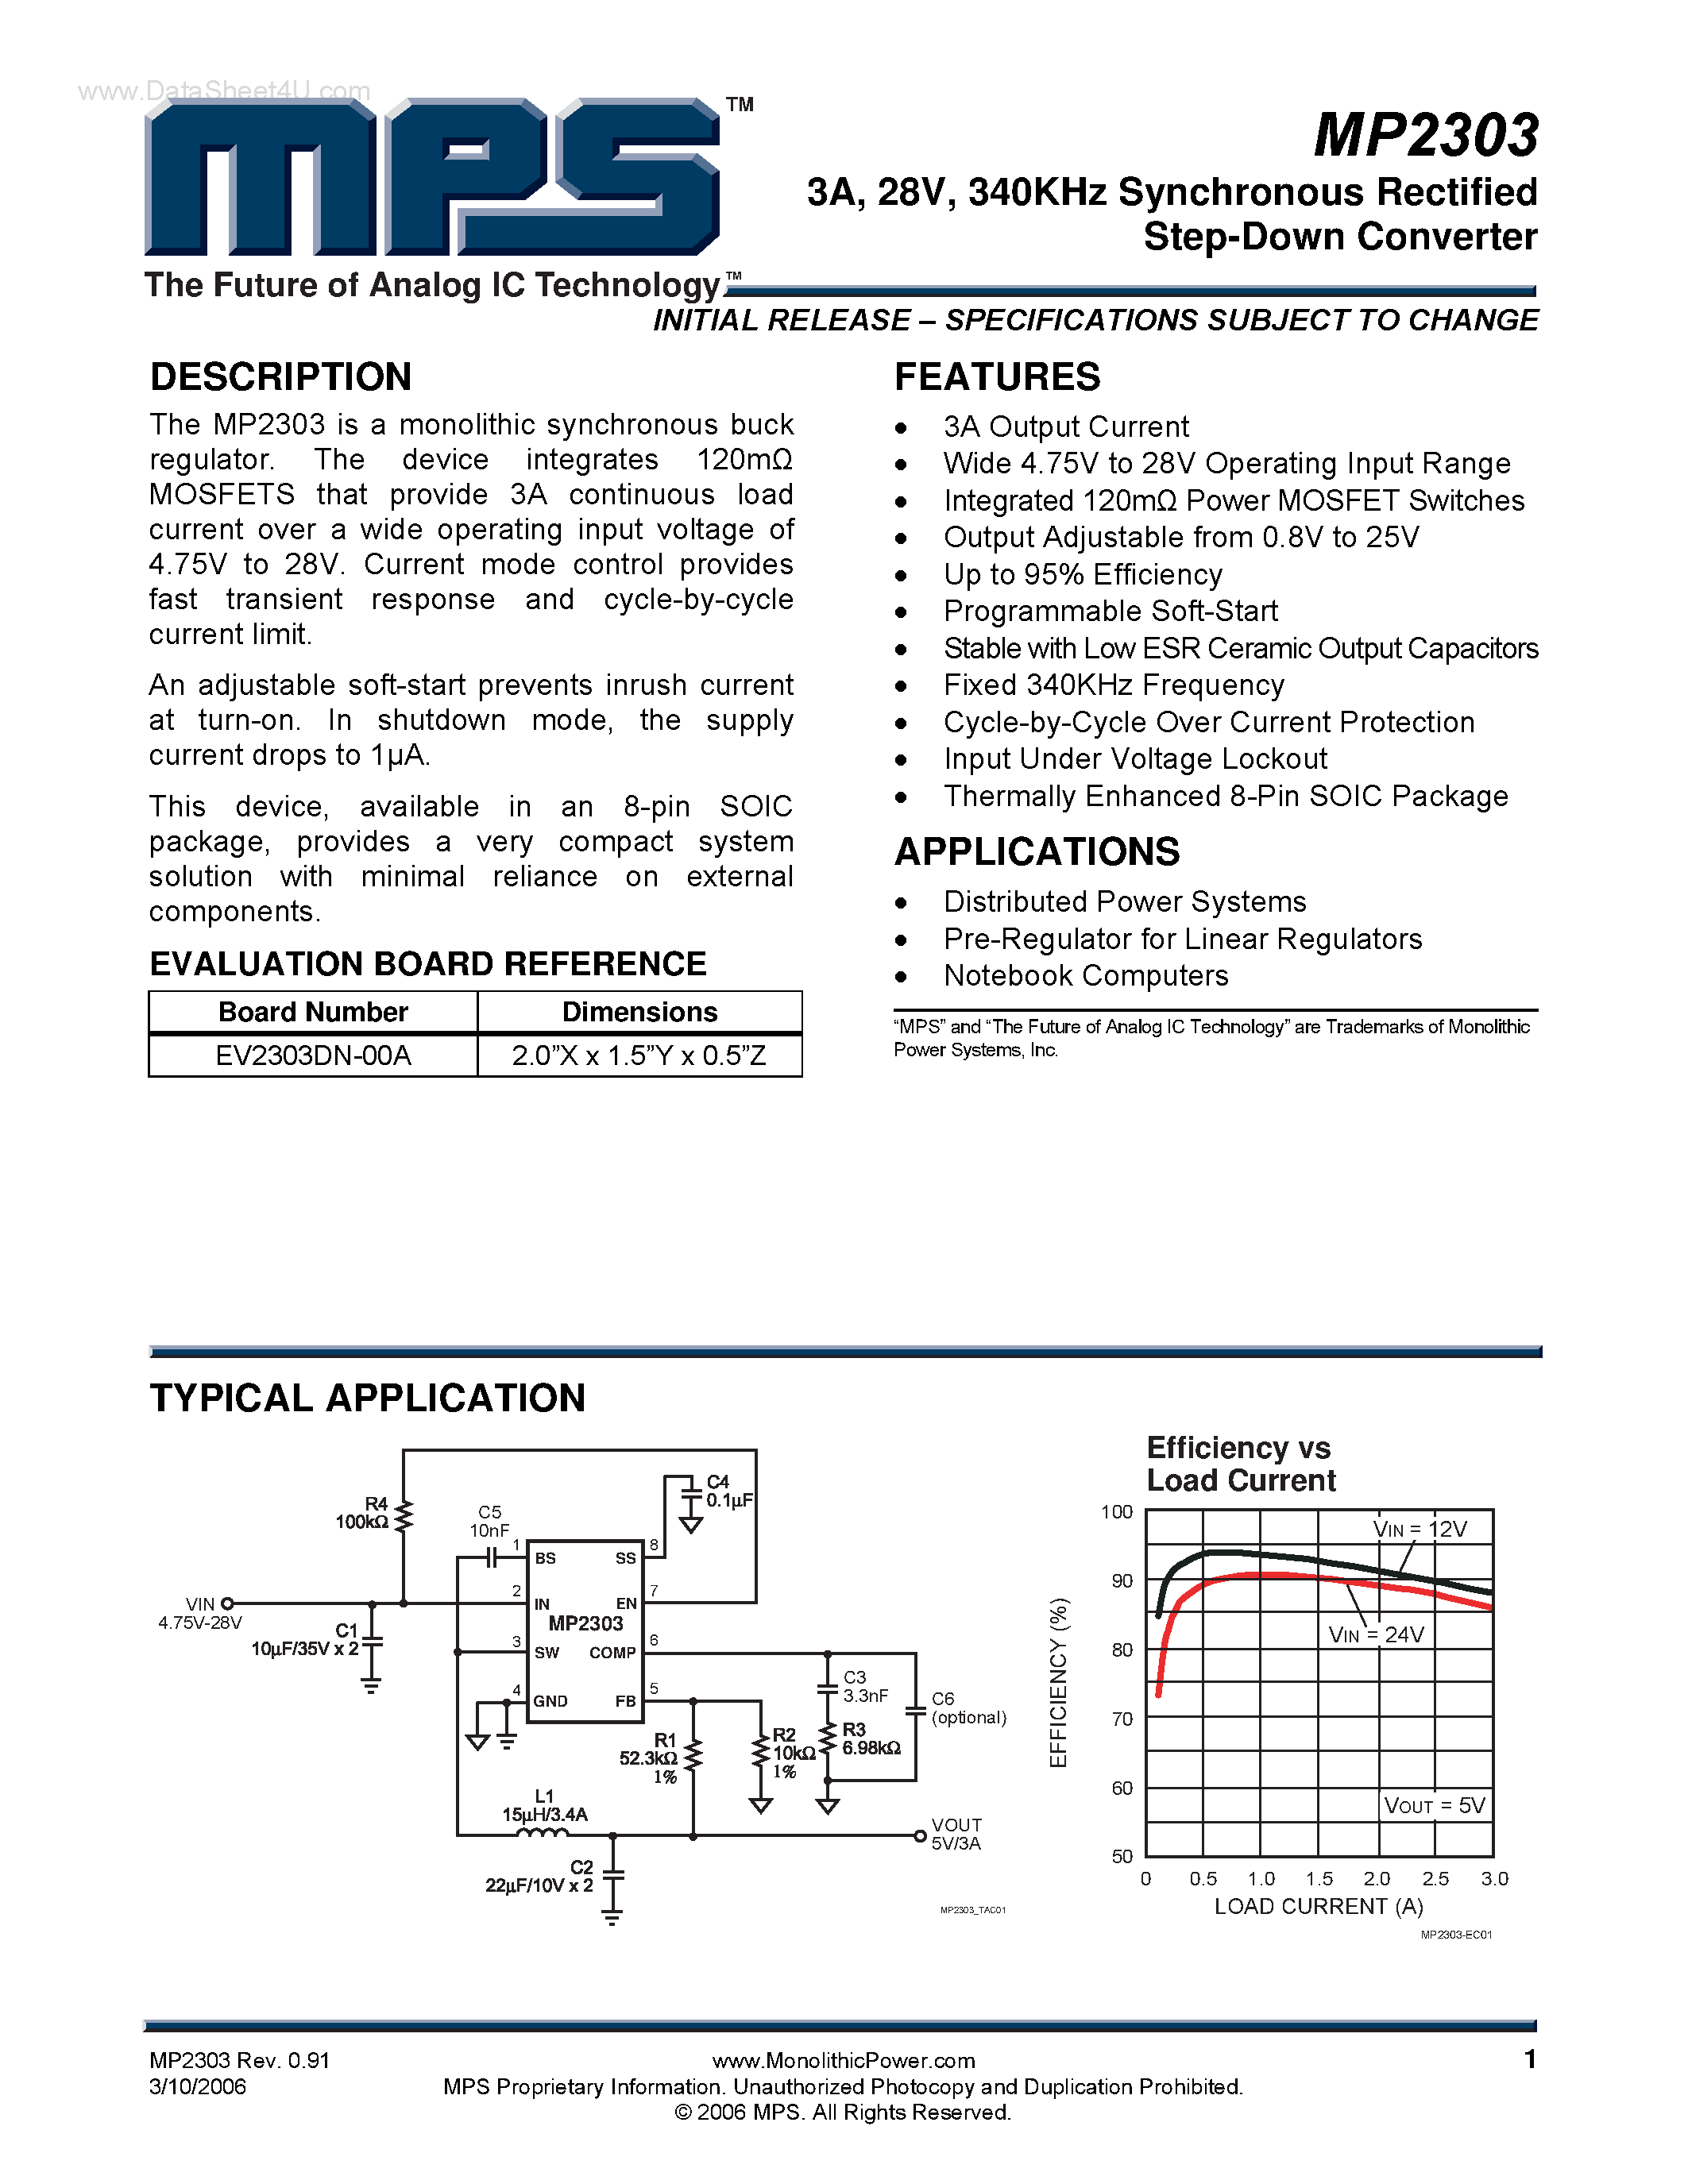 Datasheet MP2303 - 340KHz Synchronous Rectified Step-Down Converter page 1